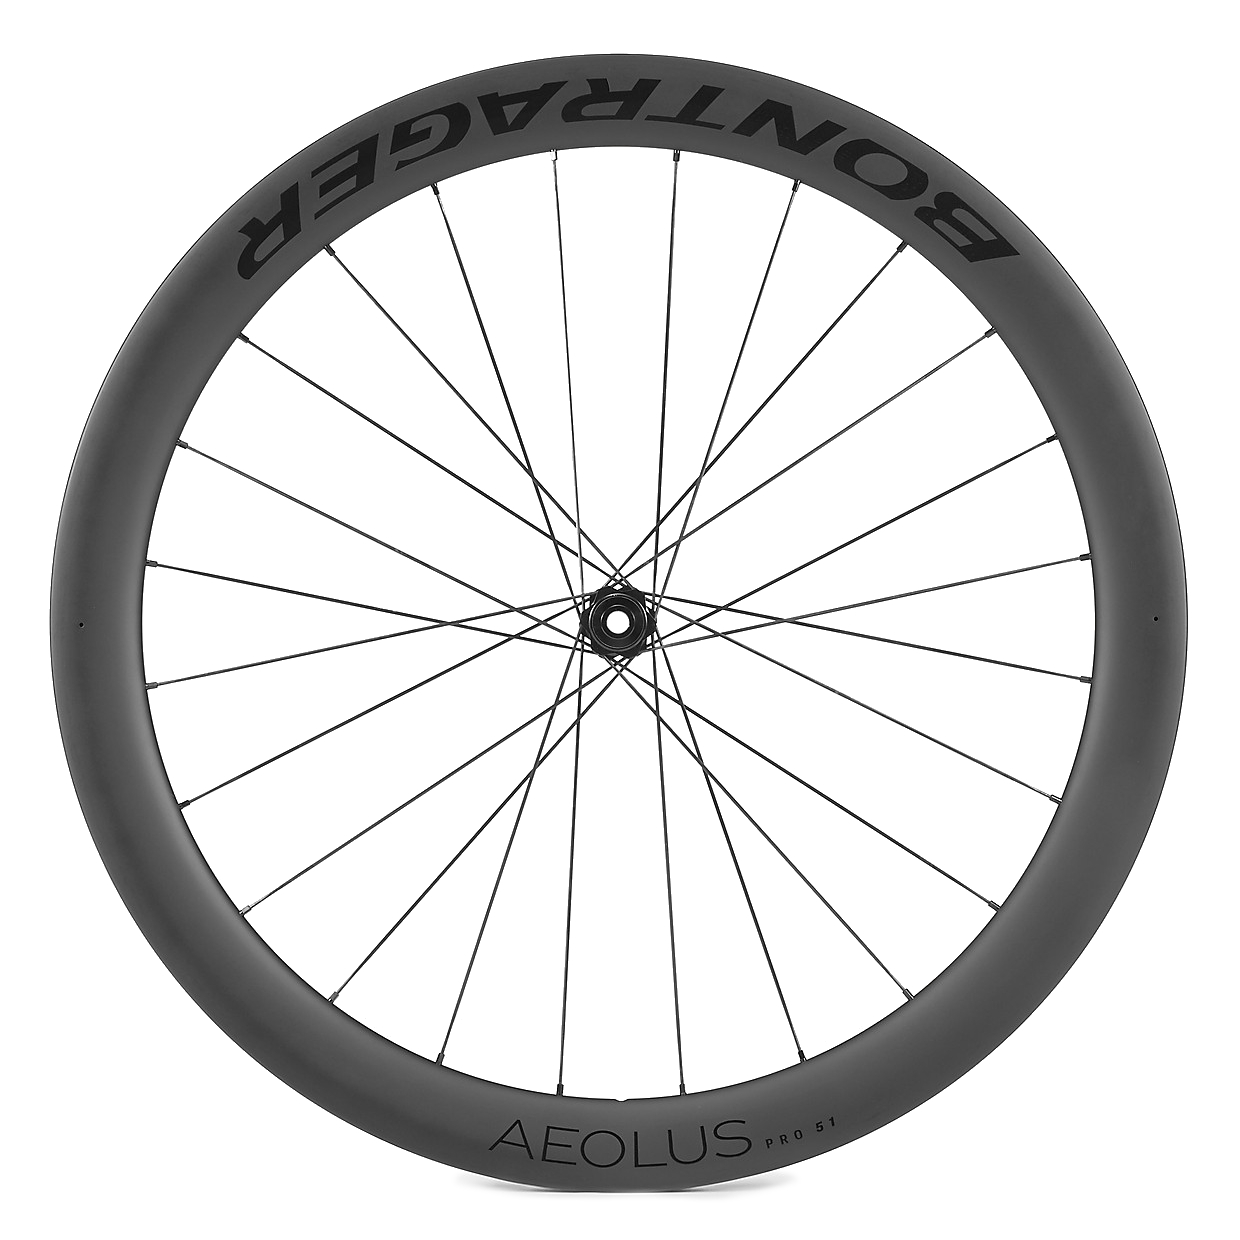 Picture of Bontrager Aeolus Pro 51 TLR Disc Carbon Front Wheel - Clincher / Tubeless - Centerlock - 12x100mm